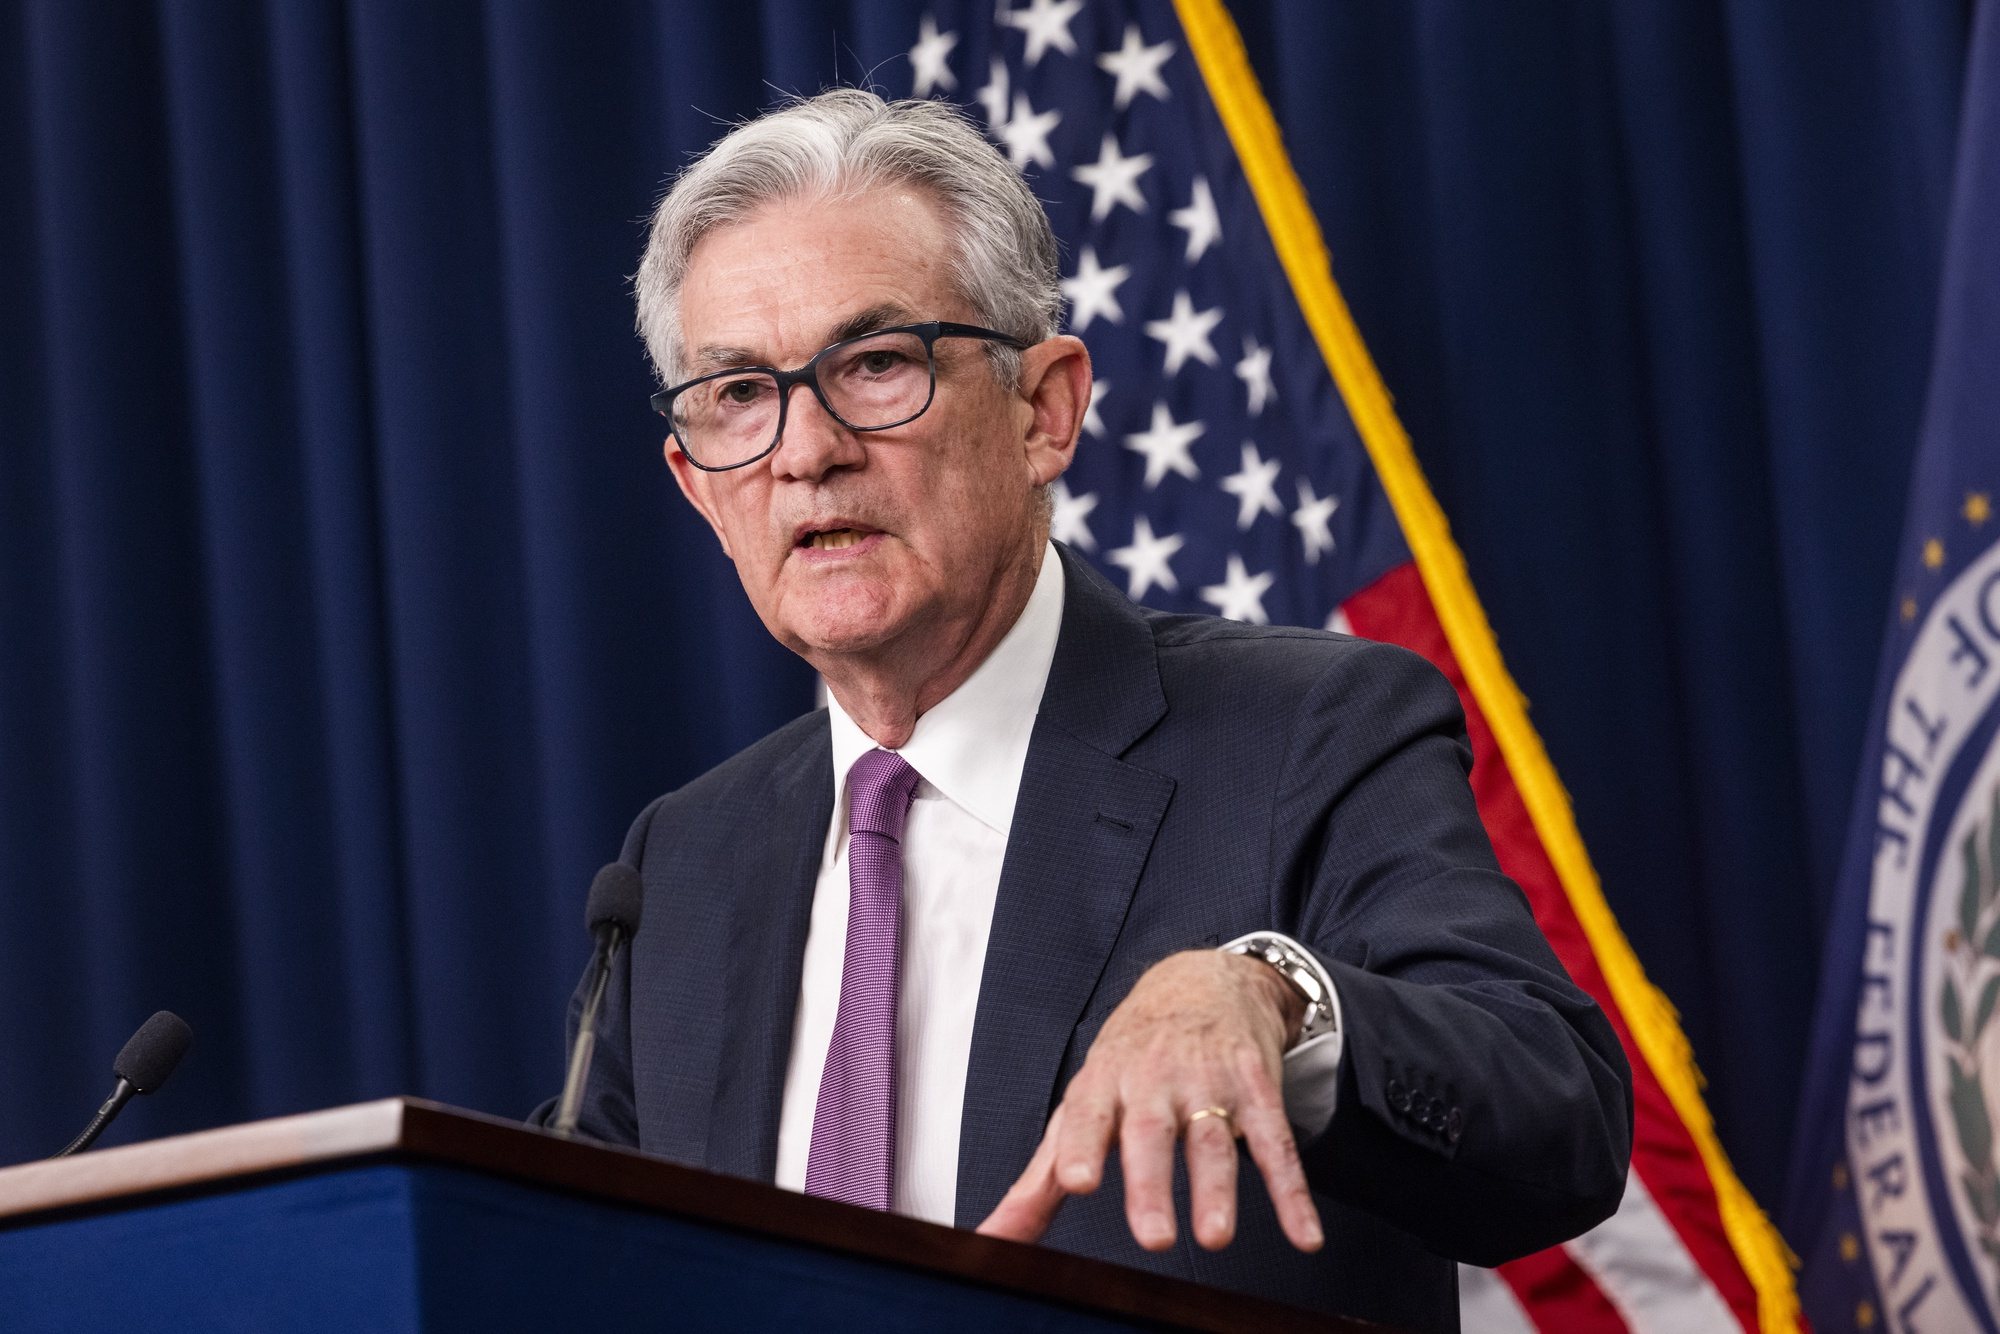 epa10094388 Federal Reserve Board Chairman Jerome Powell holds a news conference after the Fed decided to once again raise interest rates by three-quarters of a percentage point at the William McChesney Martin Jr. Building in Washington, DC, USA, 27 July 2022. The Fed hopes to temper inflation rates, which have reached their highest levels in 40 years.  EPA/JIM LO SCALZO